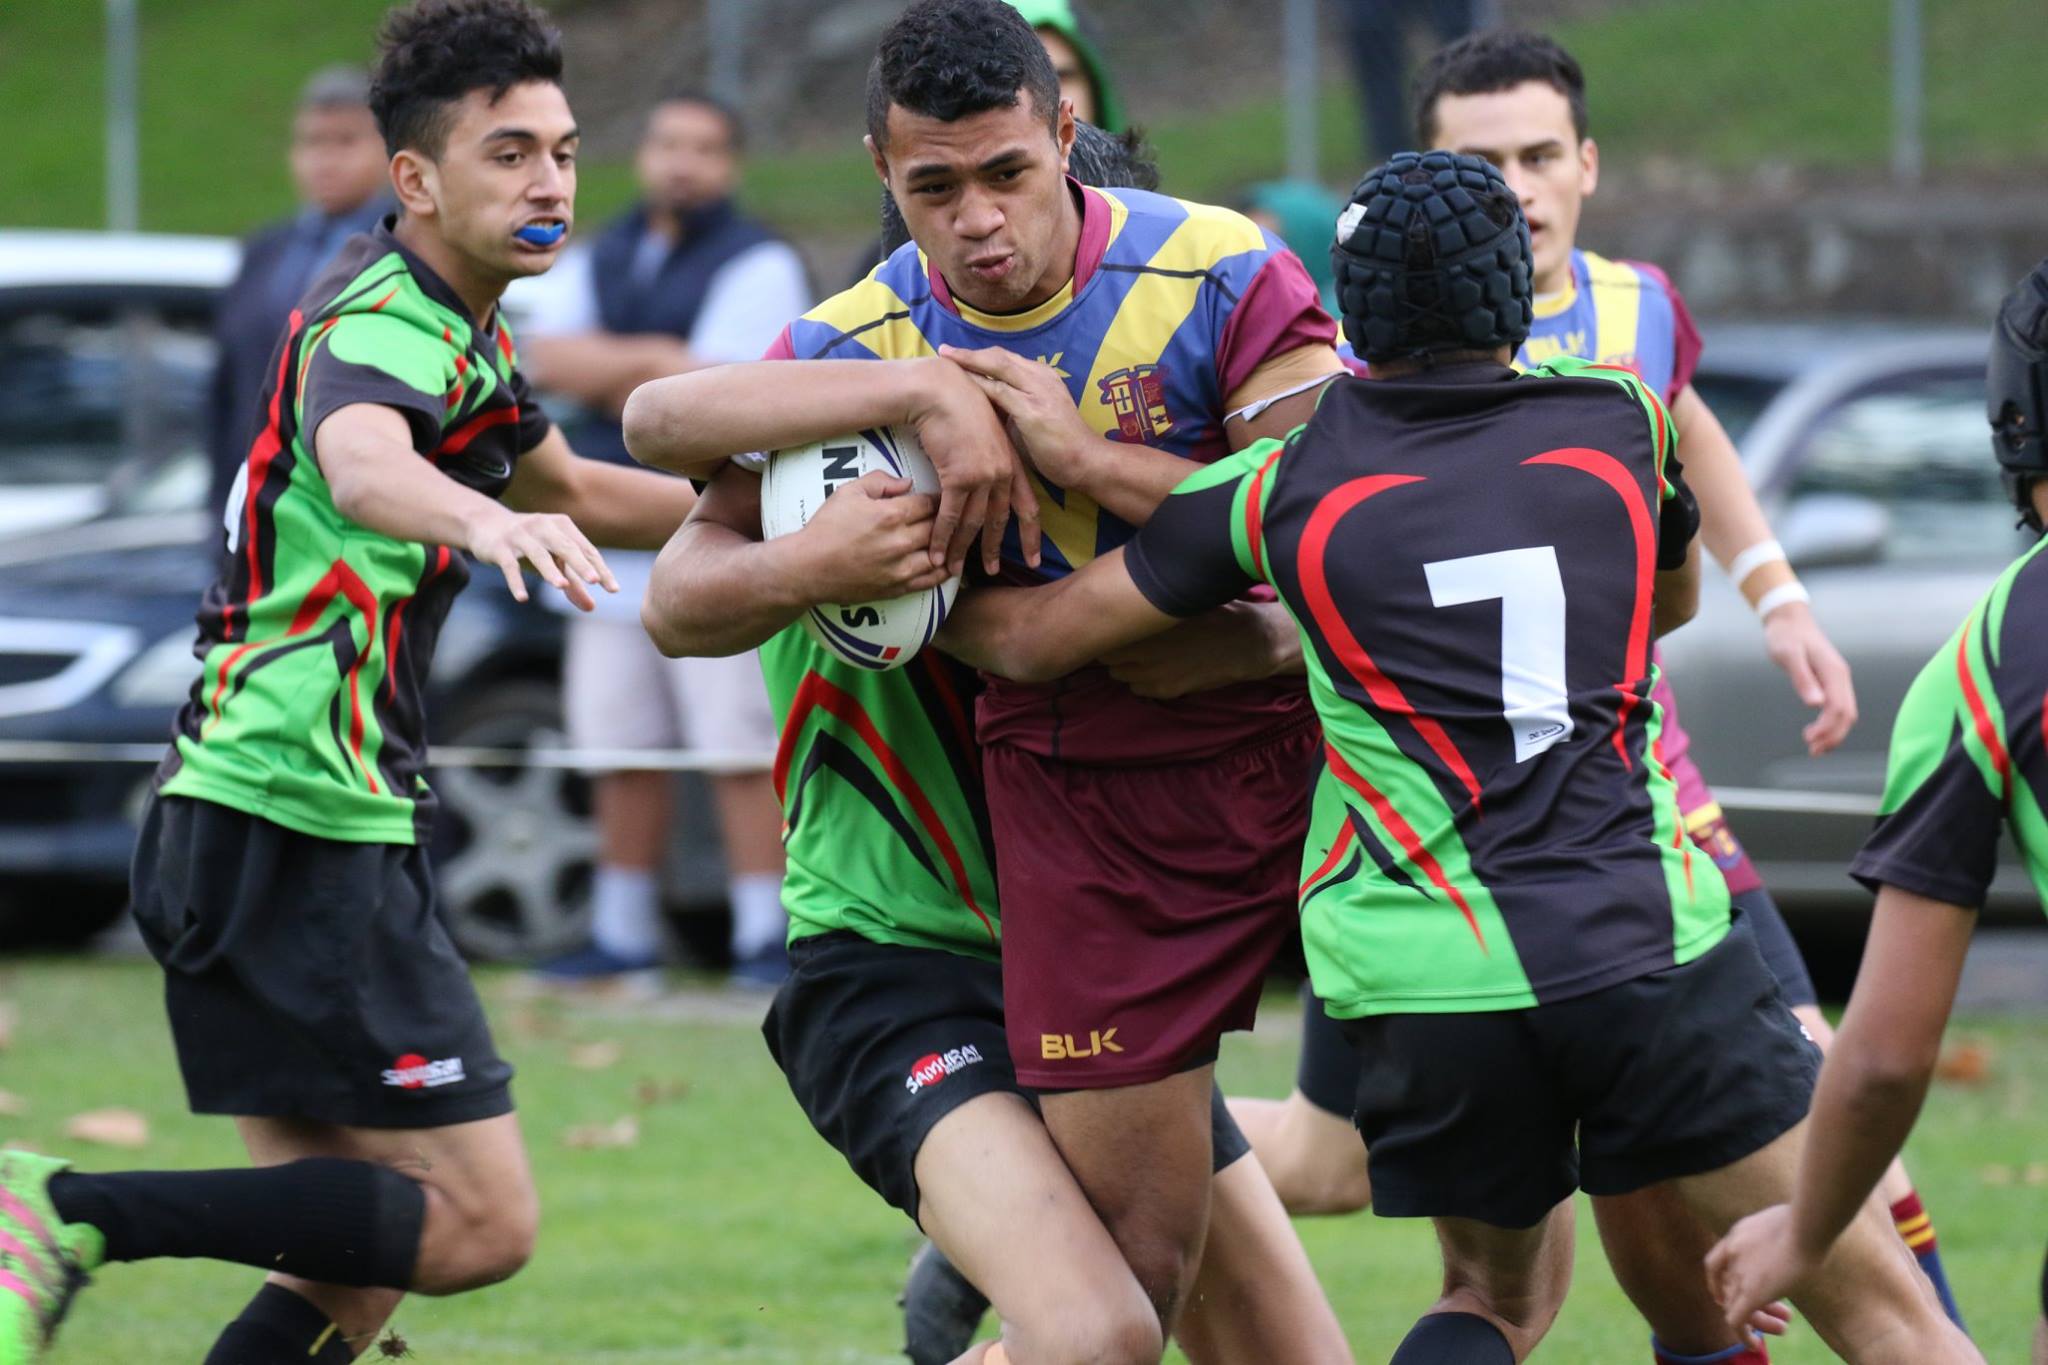 August 1 SAS College Rugby League results